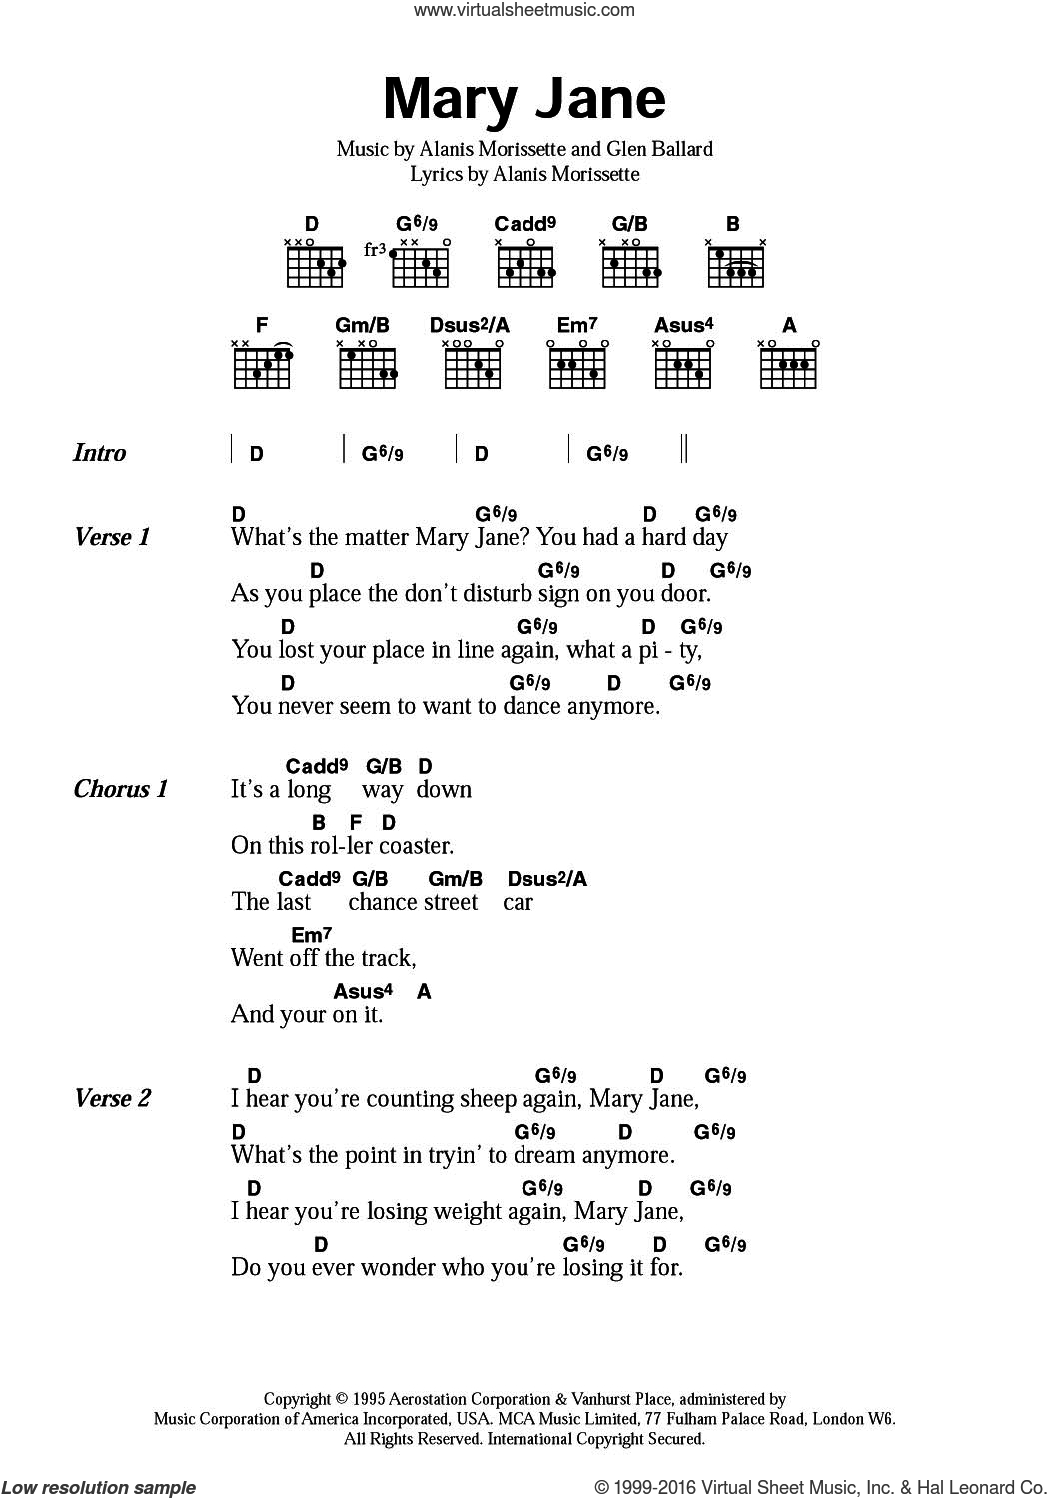 Last Dance With Mary Jane Chords Morissette Mary Jane Sheet Music For Guitar Chords Pdf